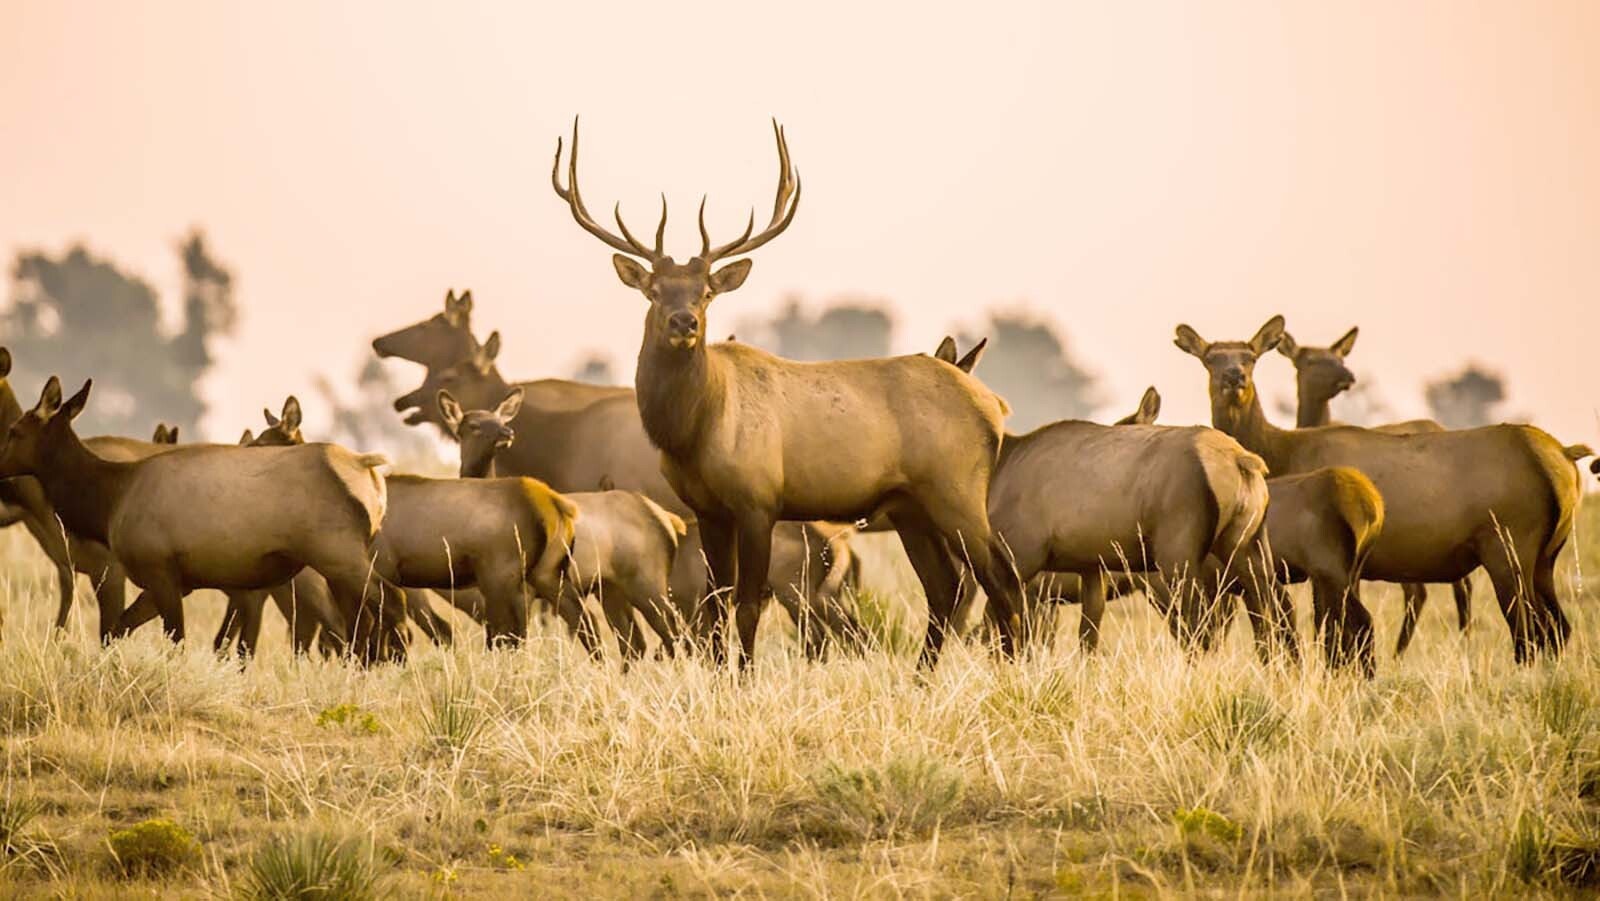 Elk started filtering into Nebraska from Wyoming decades ago, but recently their numbers have swollen to where they’re causing some problems, particularly in corn fields.